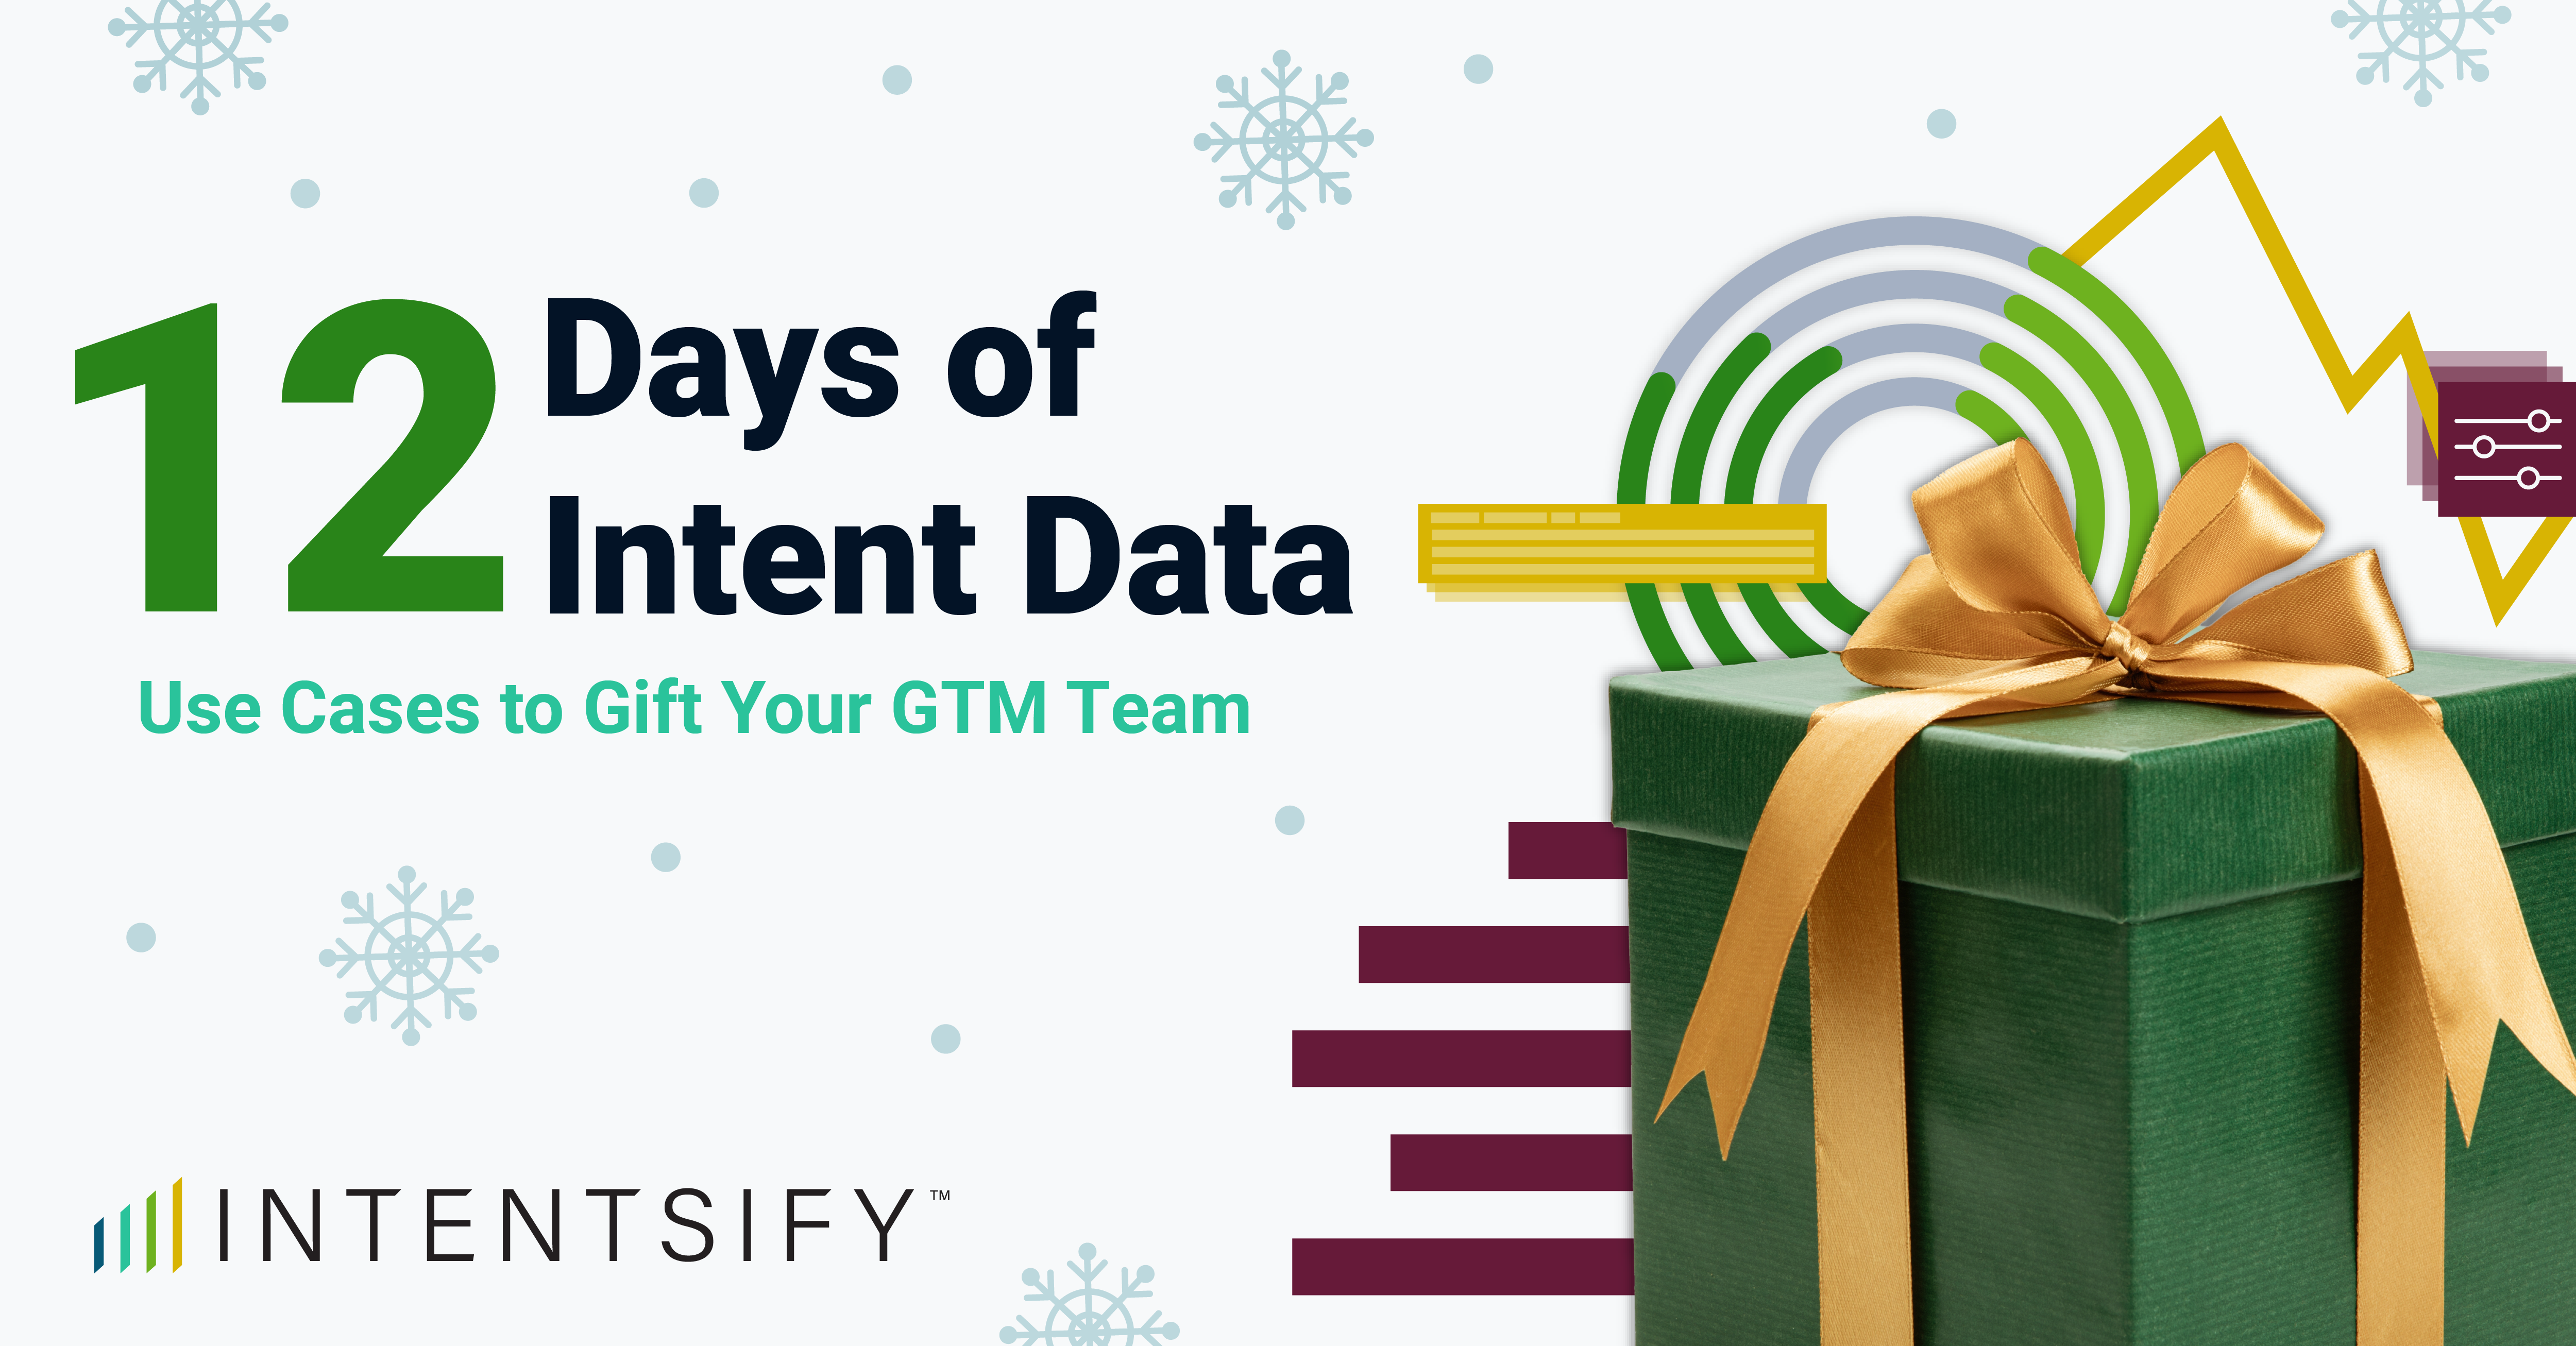 12 Days of Intent Data Use Cases